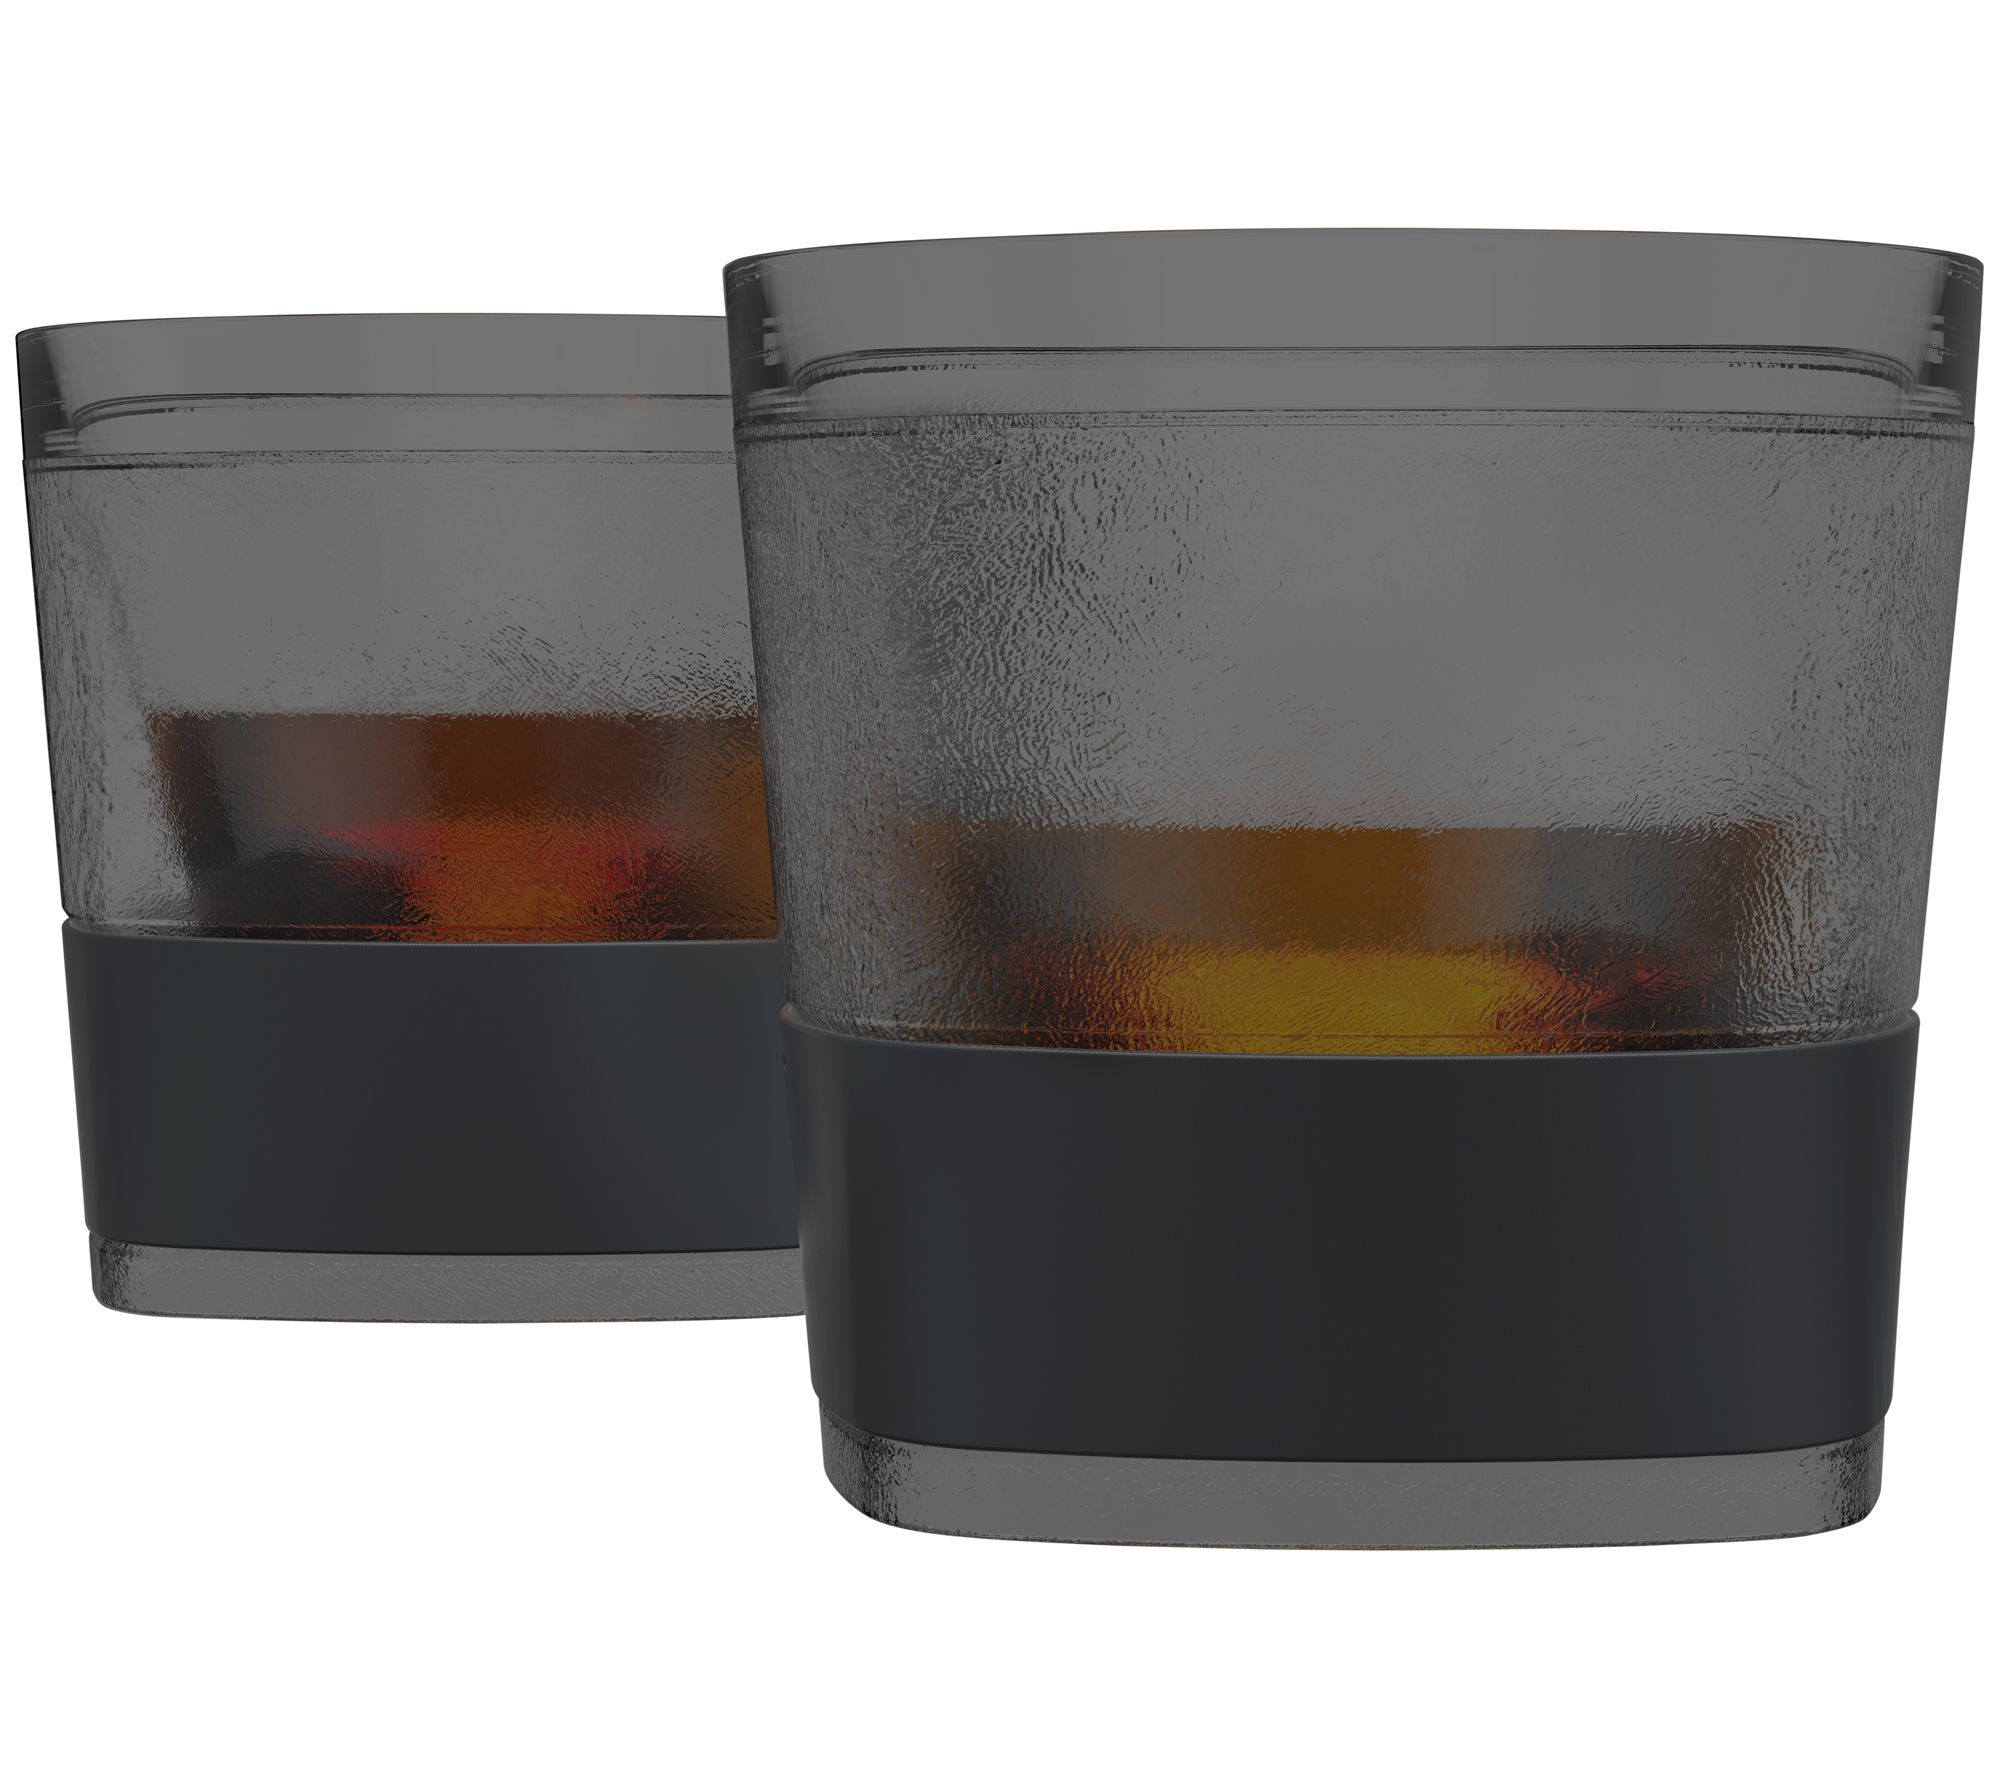 HOST Freeze Insulated Martini Cooling Cups, Plastic Freezer  Gel Chiller Double Wall Stemless Cocktail Glass Set of 2, 9 oz, Grey: Martini  Glasses